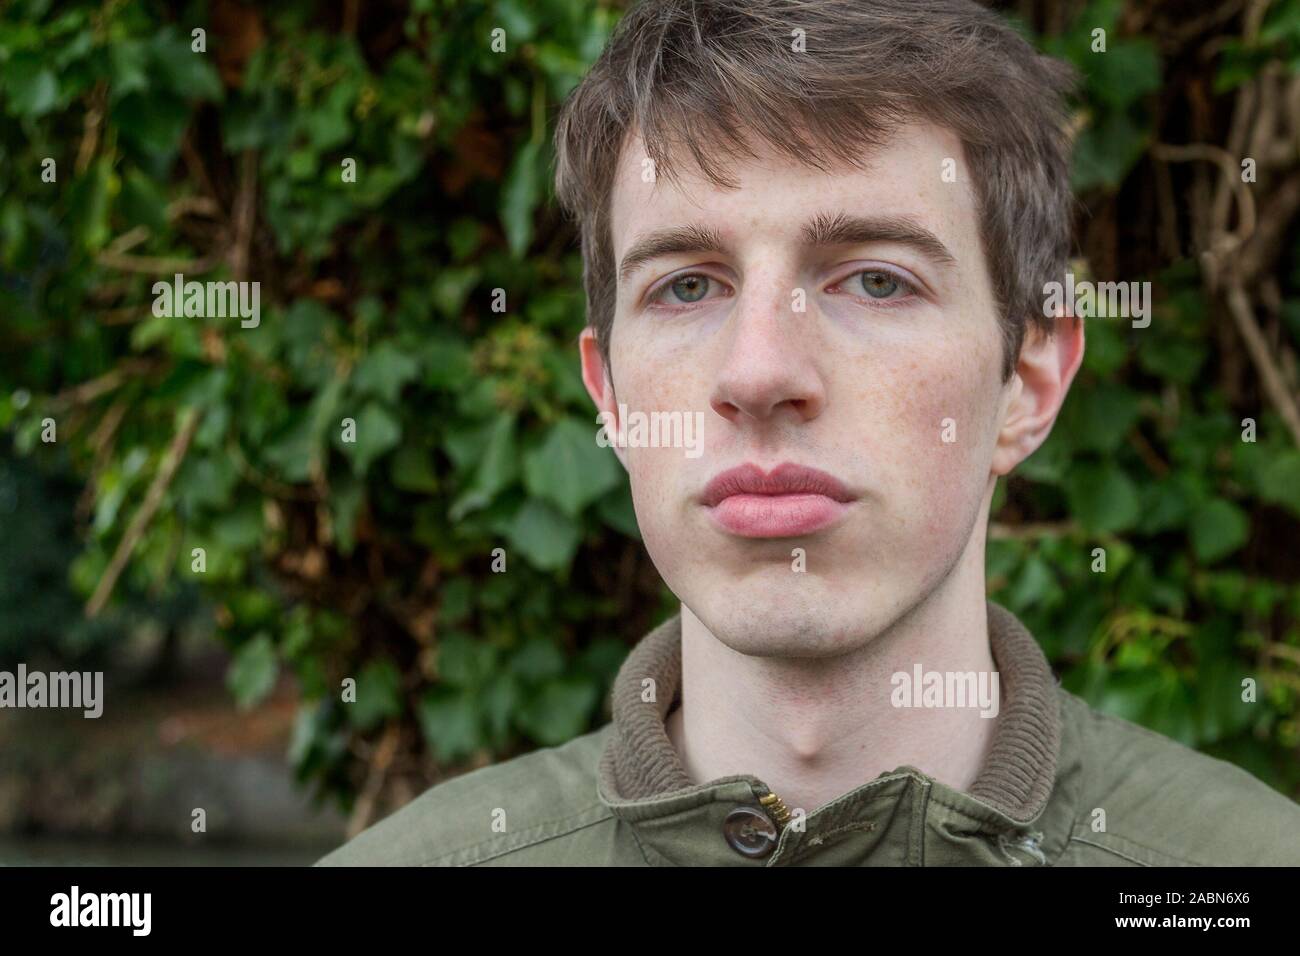 Outdoor portrait of a handsome young man wearing casual clothing. Aged in his late teens or early twenties. Stock Photo